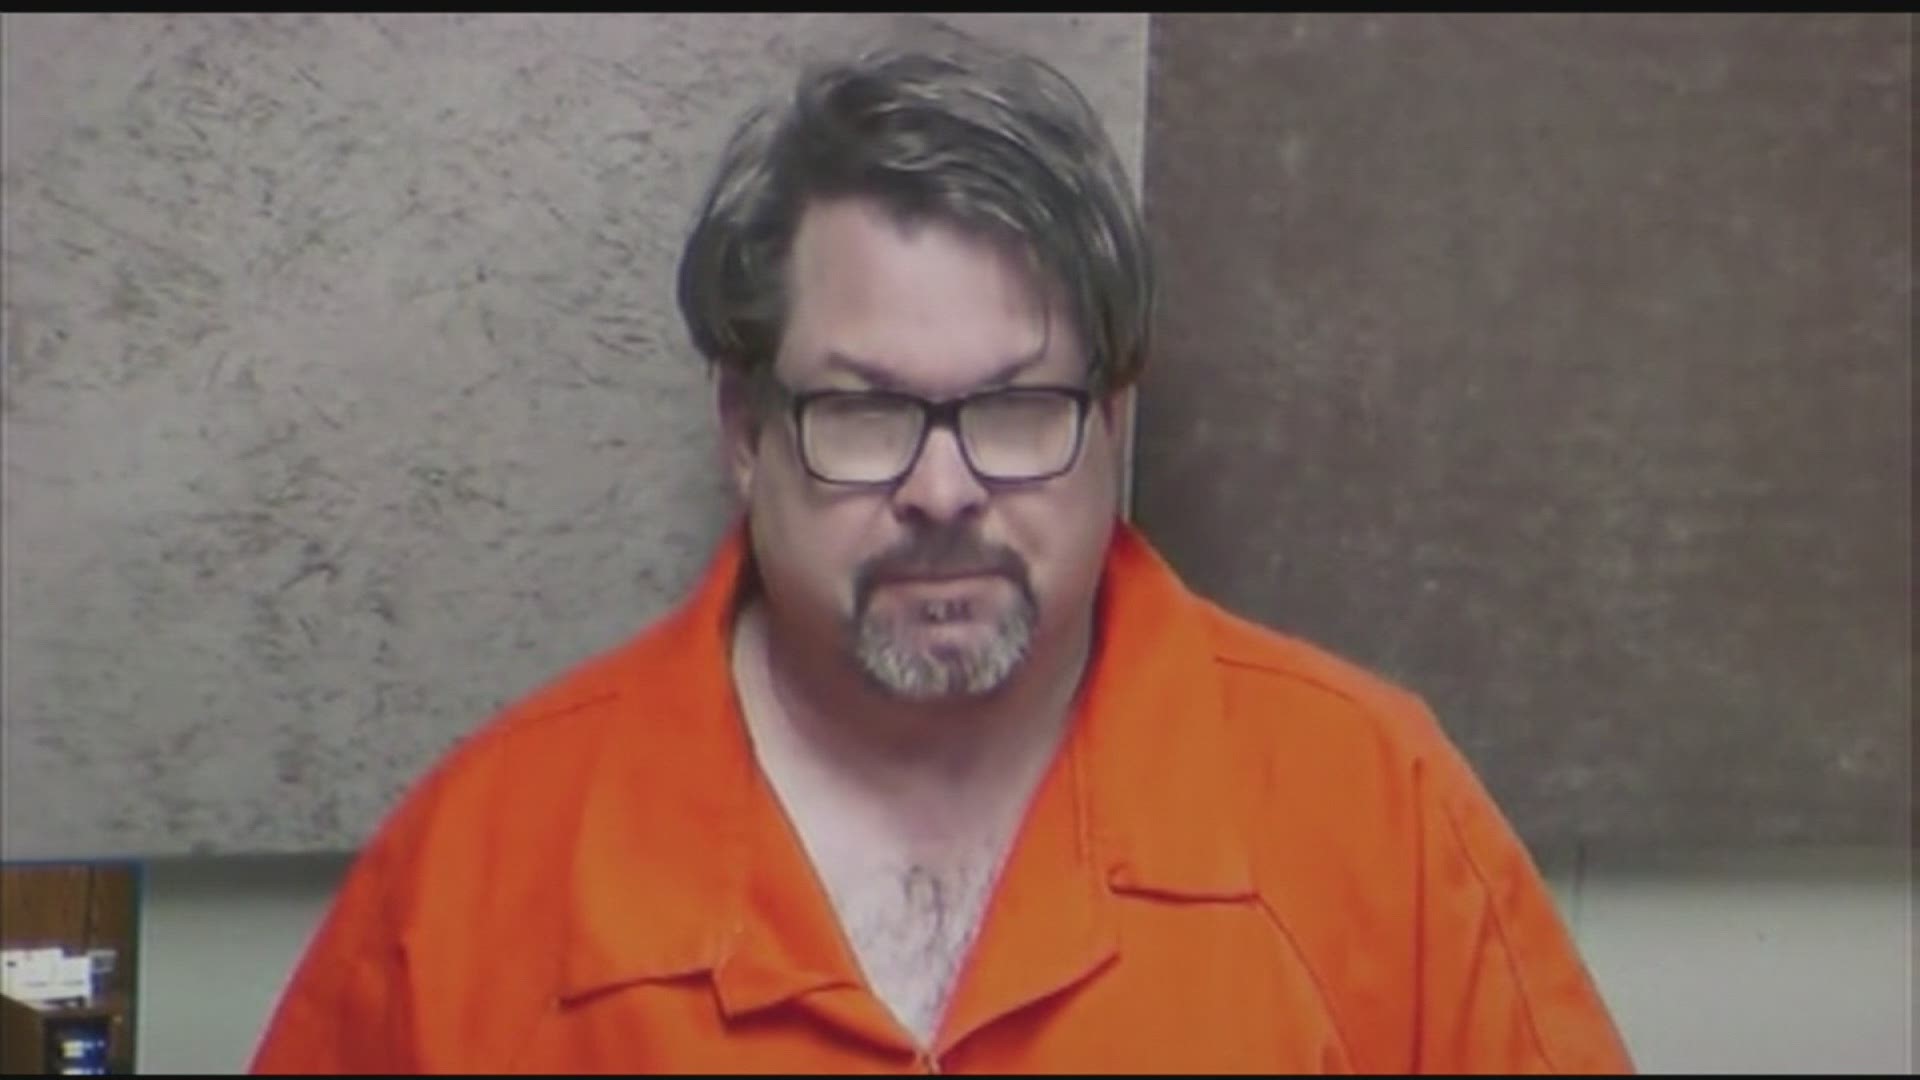 Jason Dalton, the Kalamazoo shooting spree suspect, faces multiple counts of murder. He was in court Monday, Feb. 22, 2016.